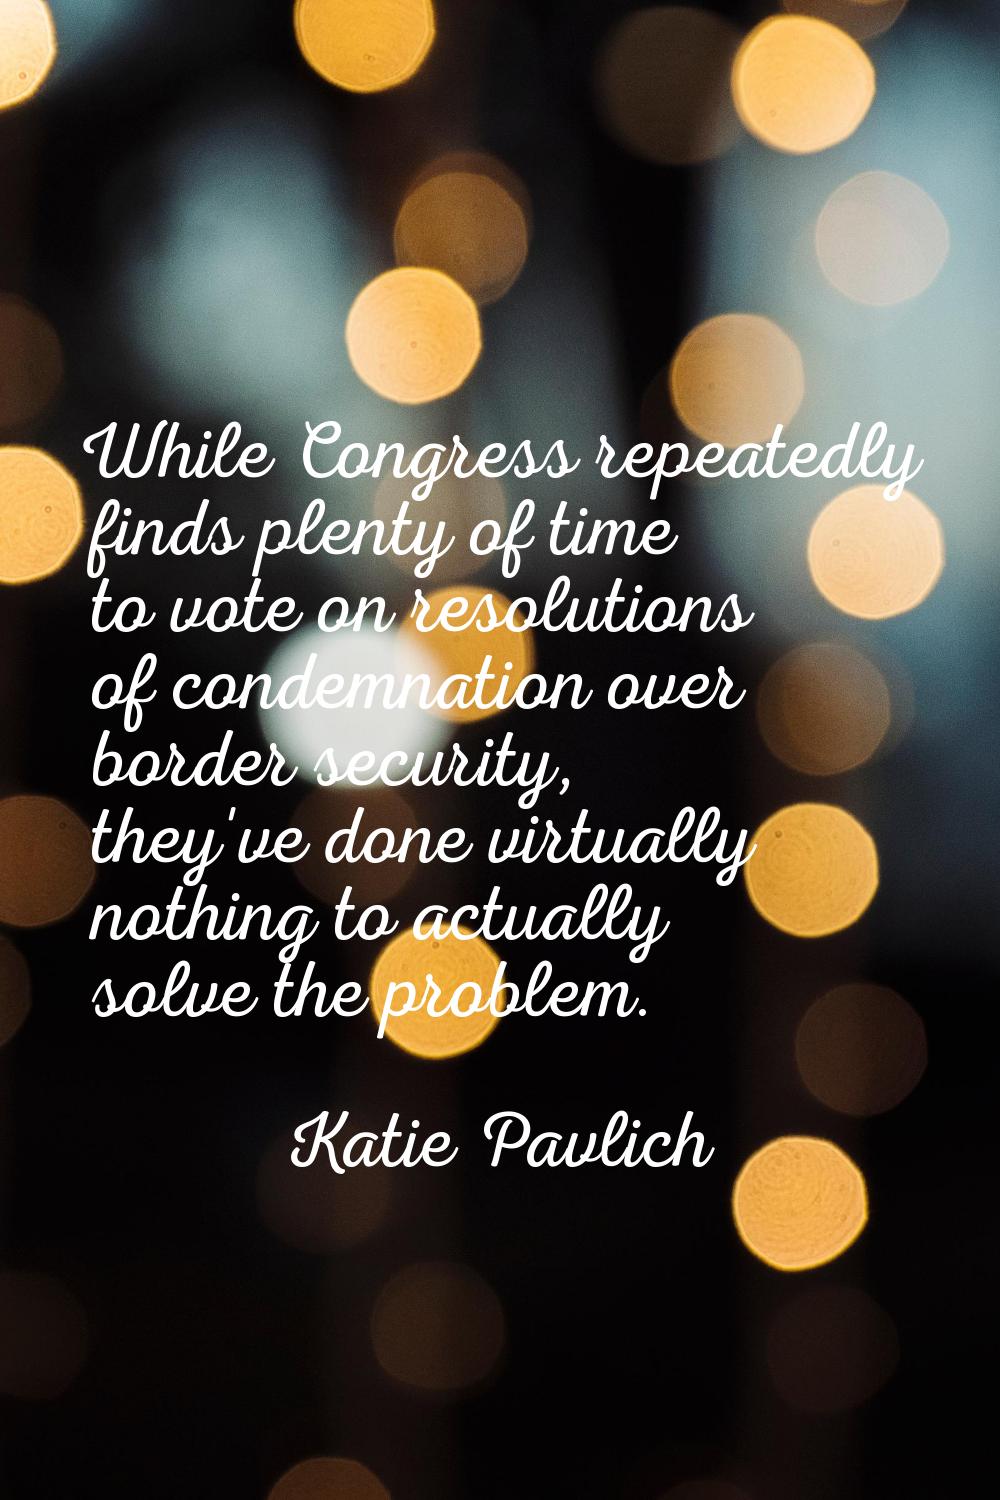 While Congress repeatedly finds plenty of time to vote on resolutions of condemnation over border s